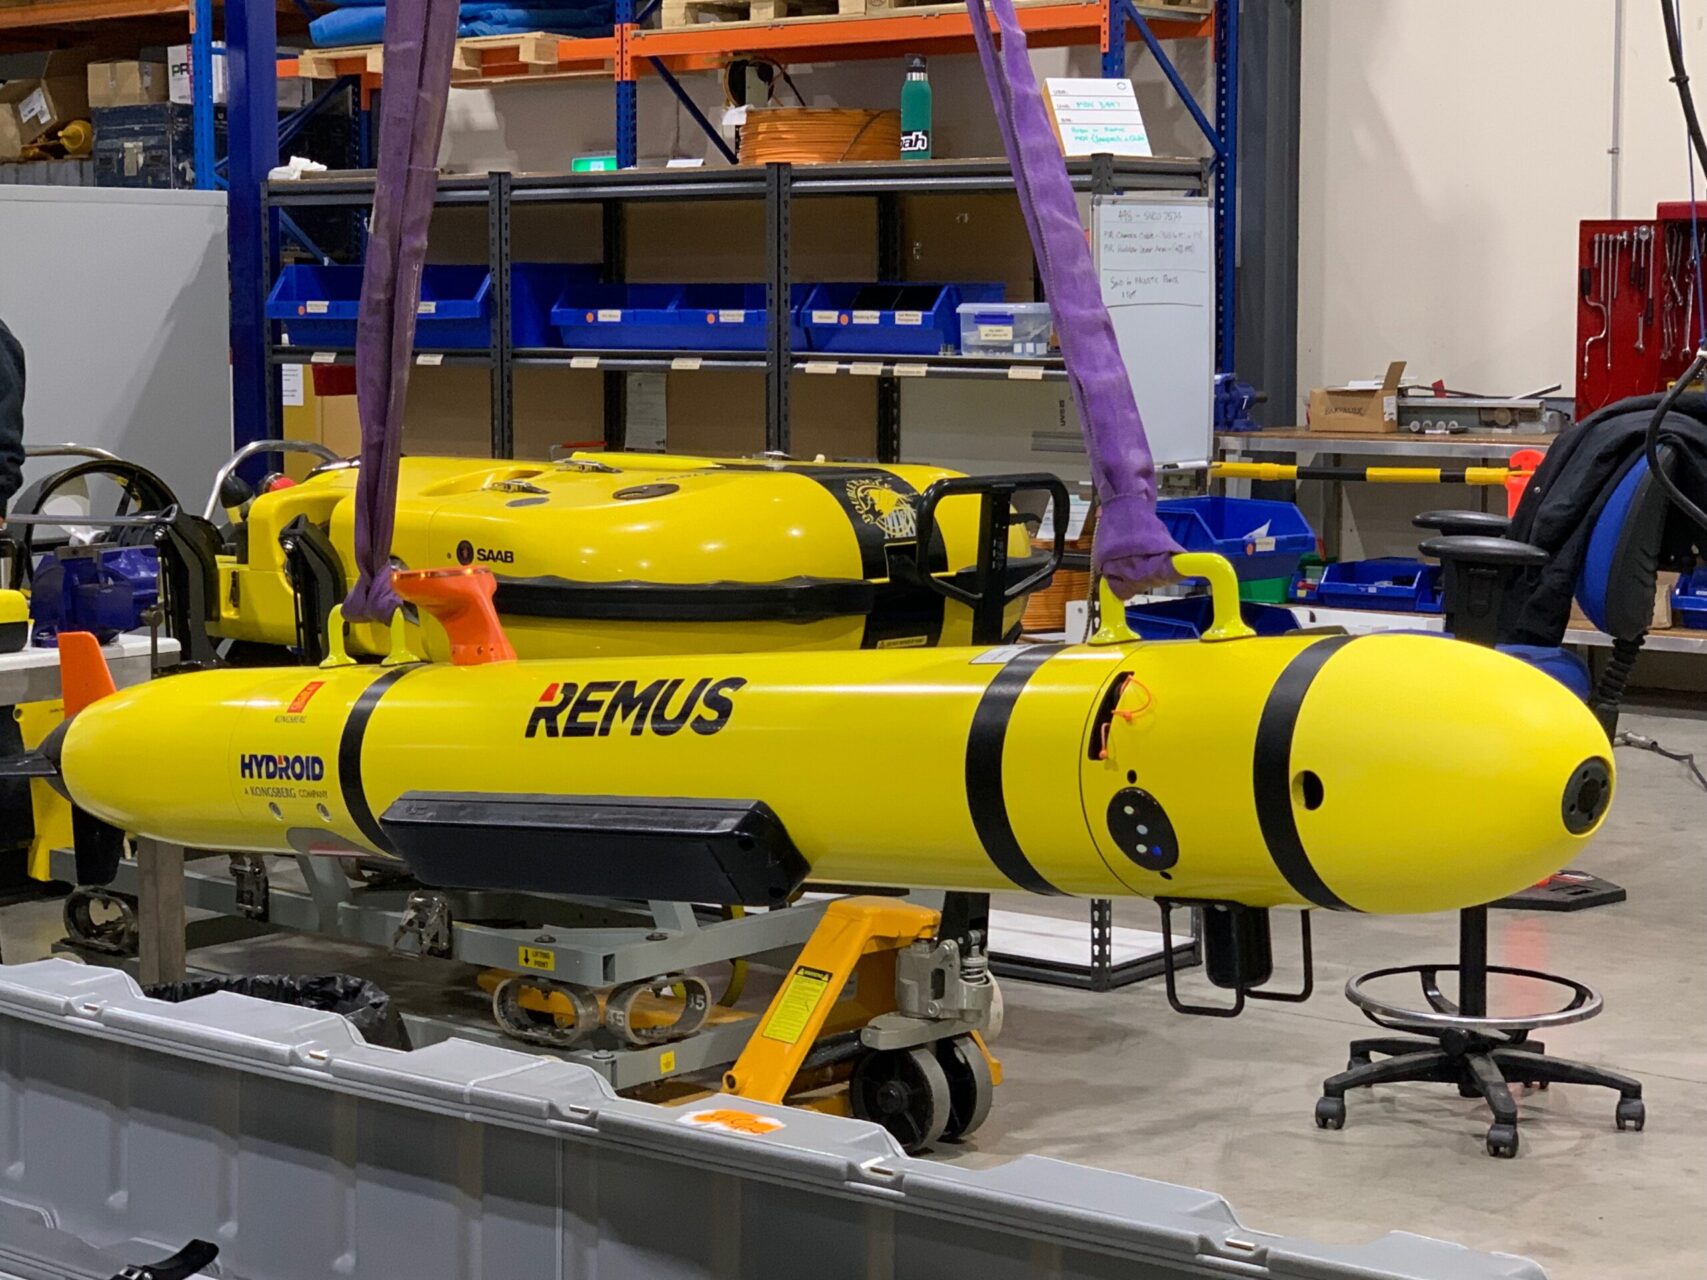 REMUS 300 Delivered to US Navy